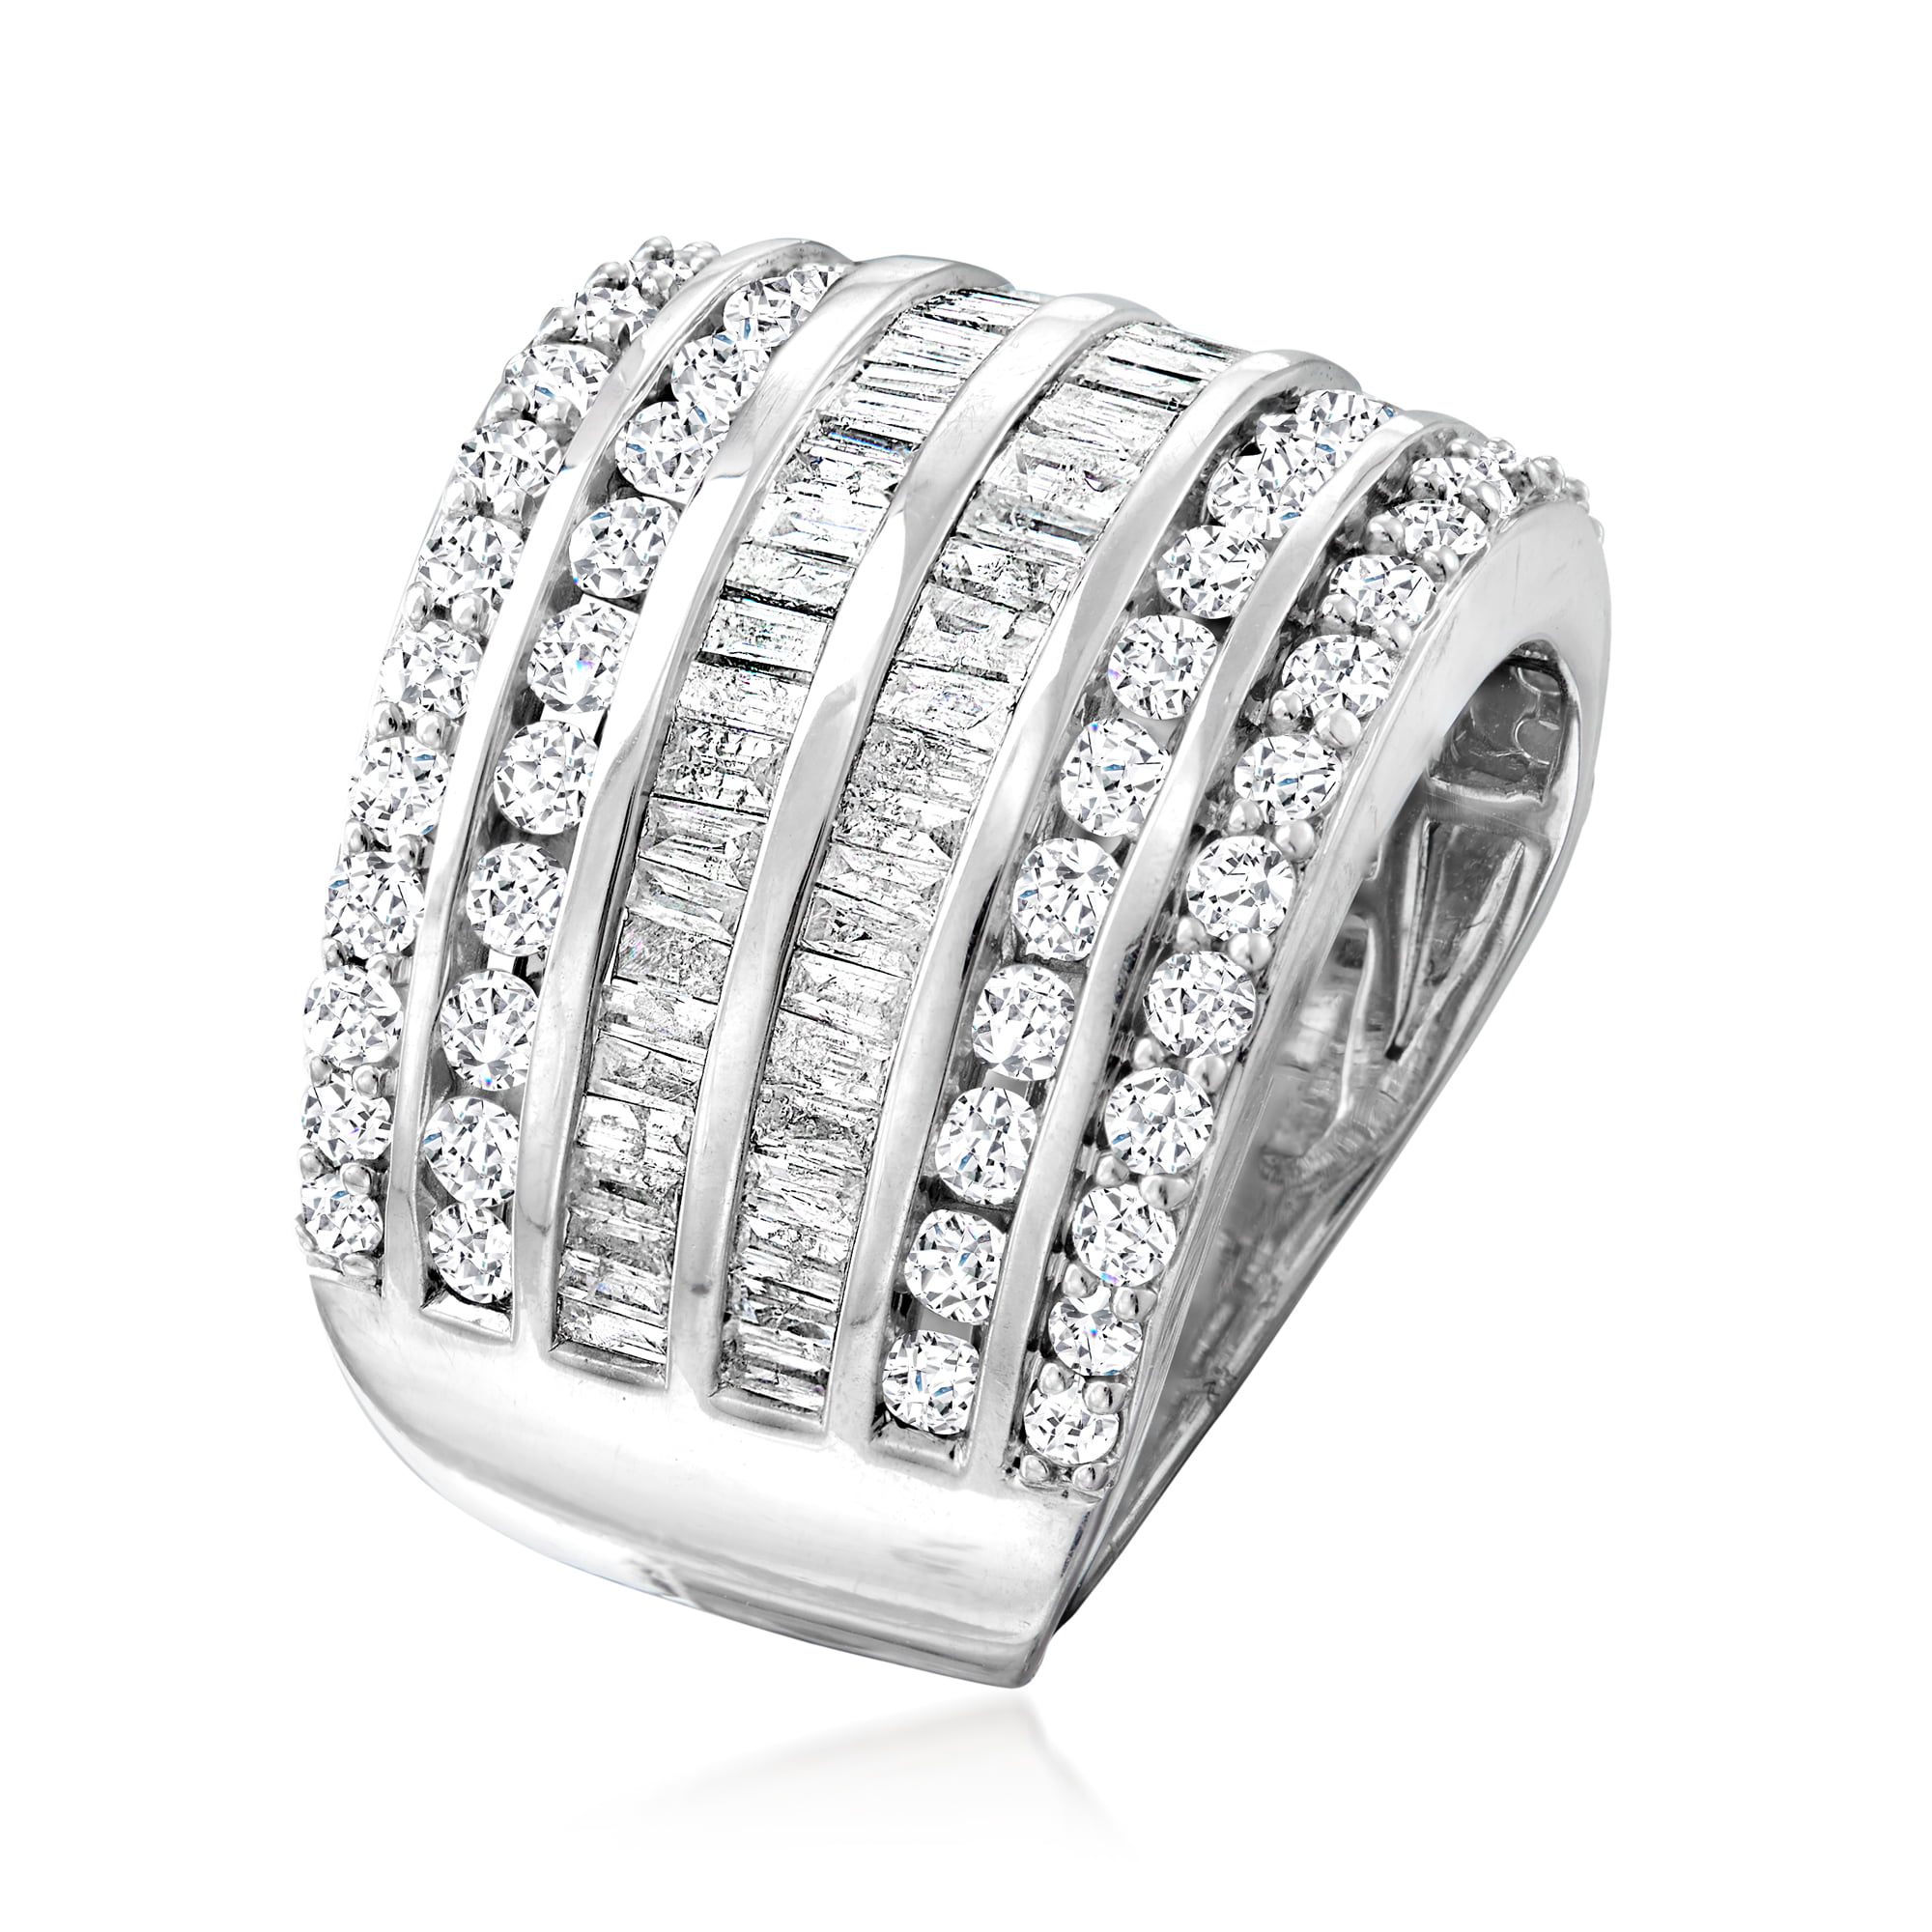 Ross-Simons 3.00 ct. t.w. Baguette and Round Diamond Multi-Row